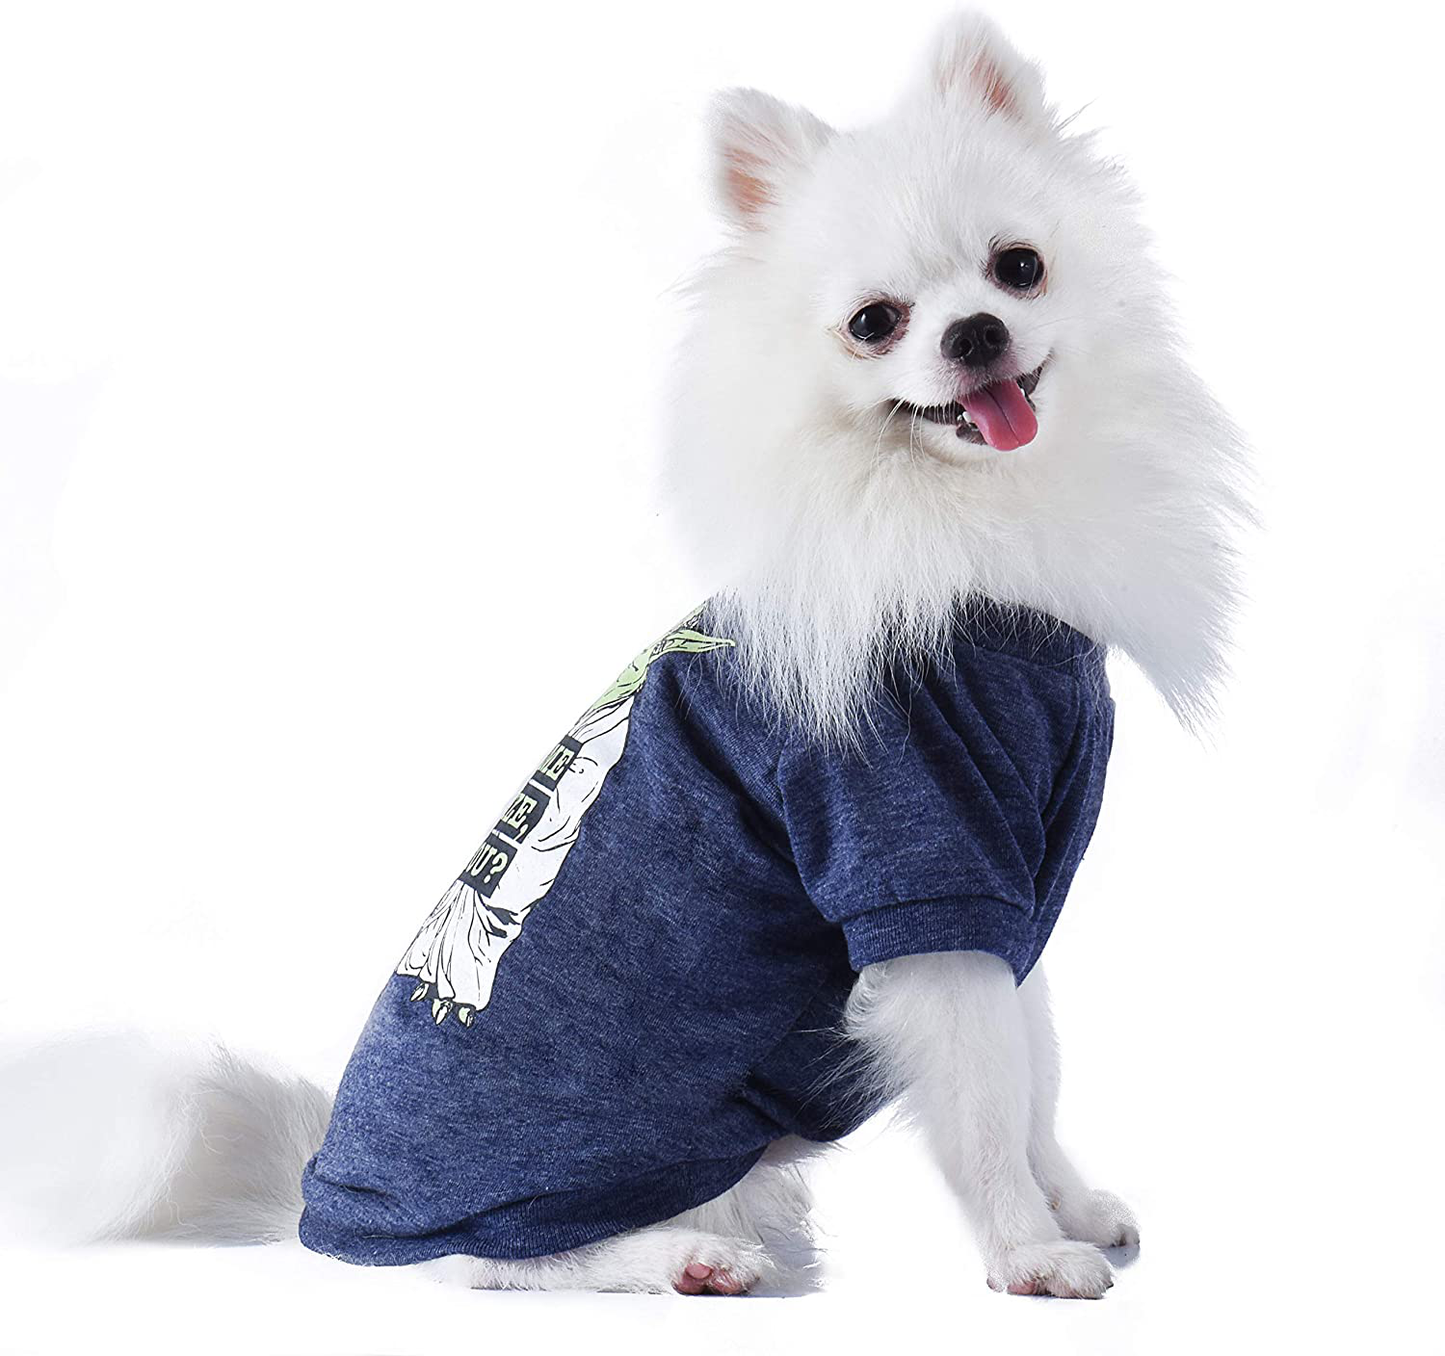 Star Wars for Pets Yoda Dog Tee - Star Wars for Pets Yoda Shirt for Dogs - Star Wars Dog Costume, Dog Clothes, Star Wars Dog Shirt, Star Wars Pet Shirt, Pet Clothes, Yoda Pet Shirt Animals & Pet Supplies > Pet Supplies > Cat Supplies > Cat Apparel Fetch for Pets   